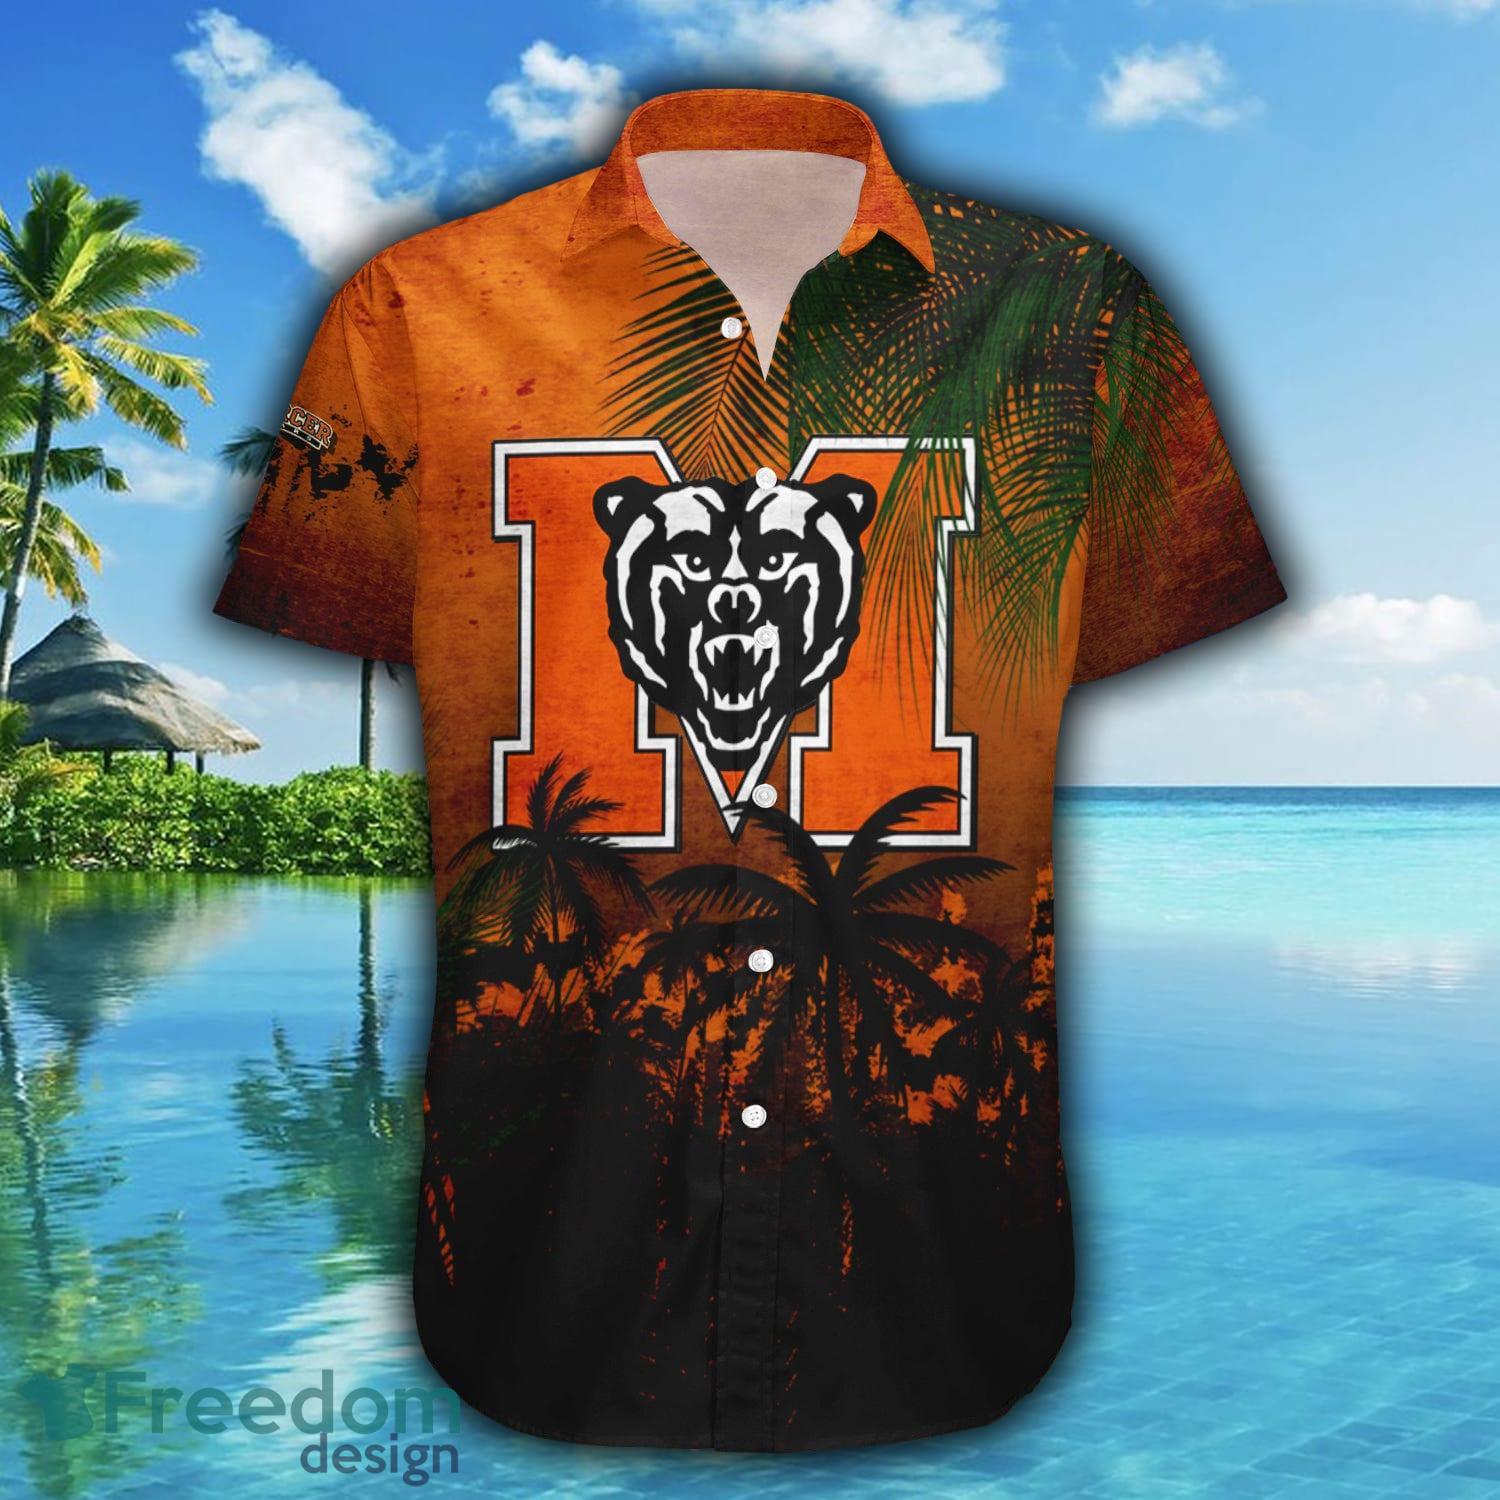 Miami Hurricanes Baseball Jersey Shirt Personalized Gift For Football Lover